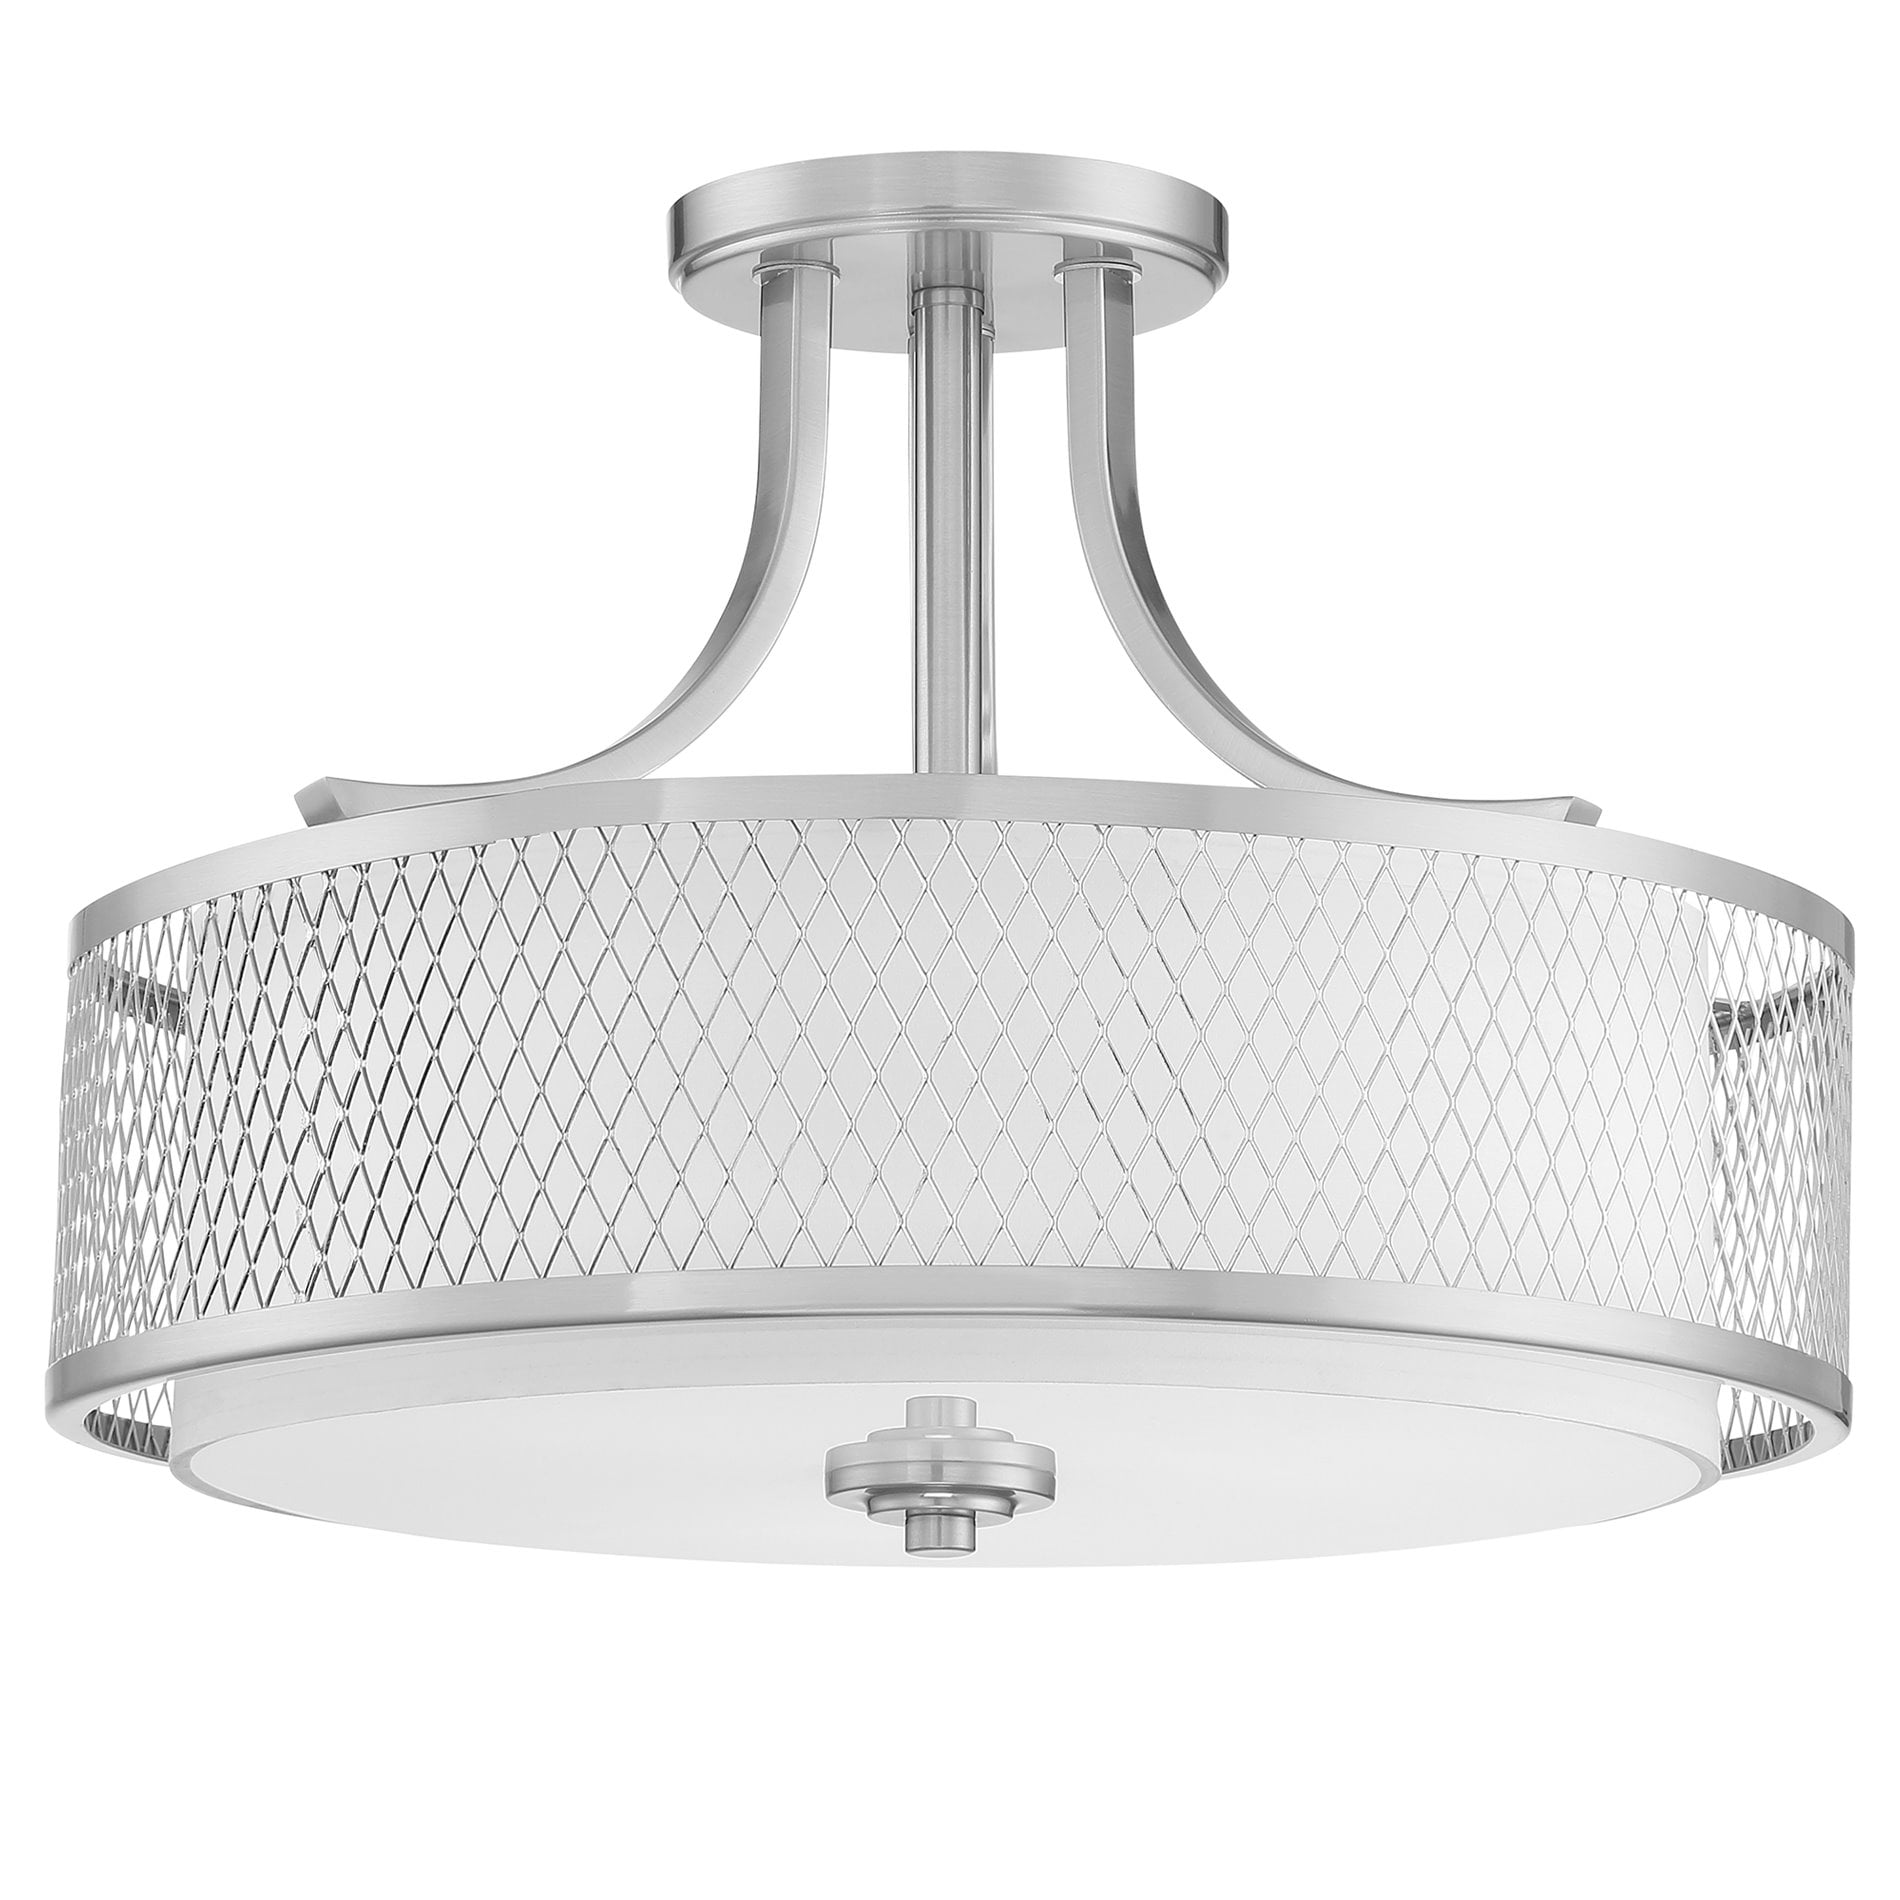 Antique Brushed Nickel Finish 4000K Cool White Dimmable 1200 Lumens LB72131 LED Semi Flush Mount Ceiling Fixture